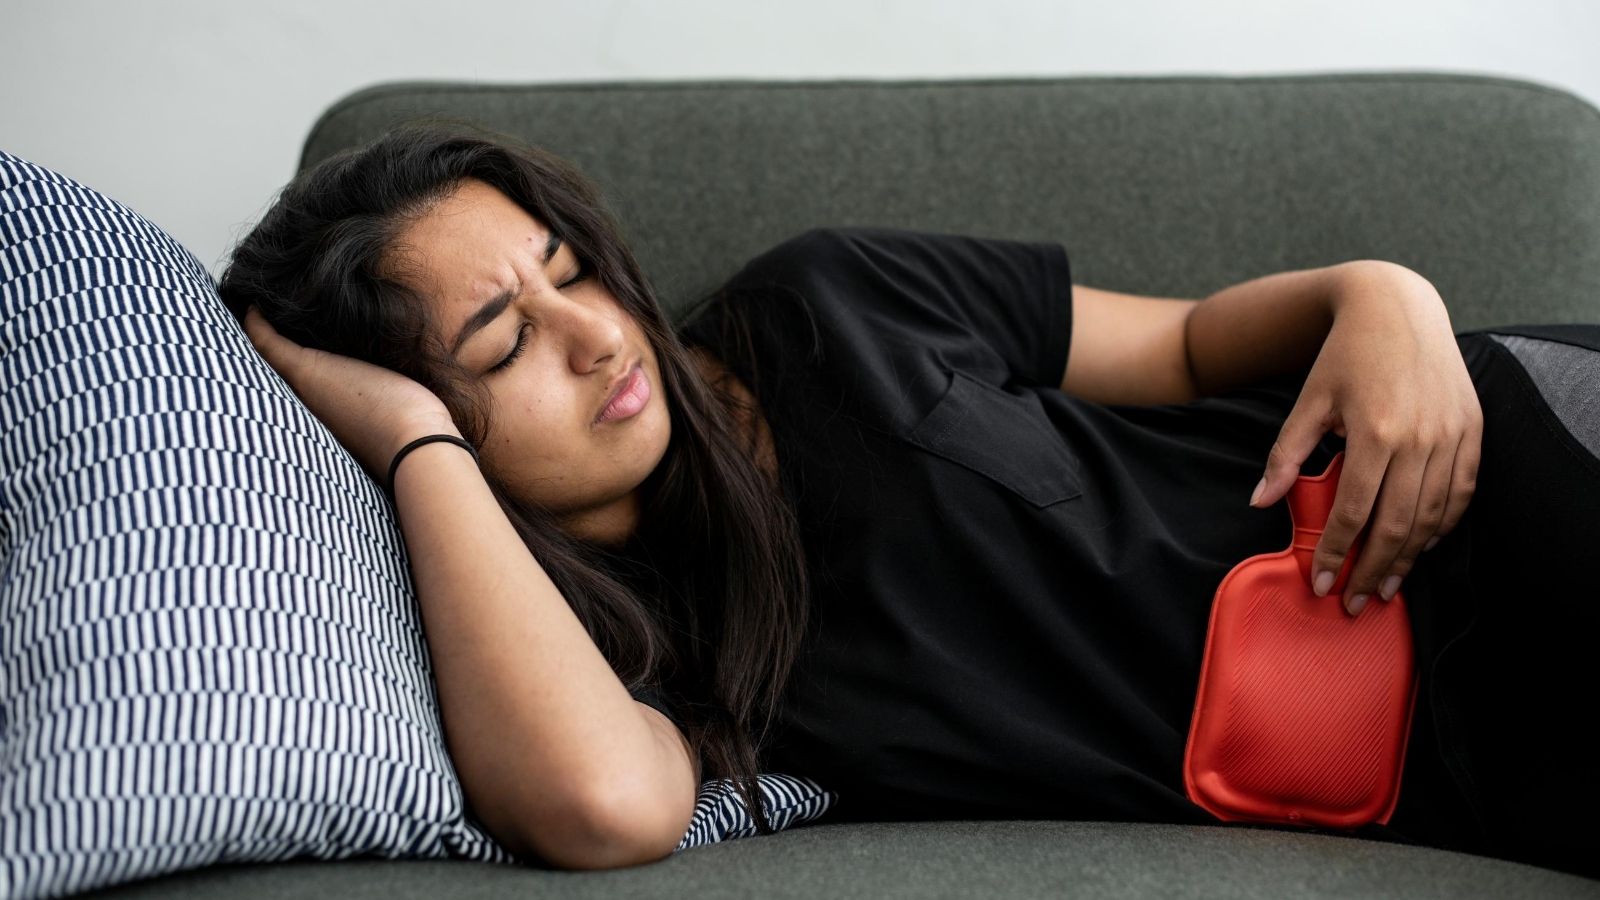 A woman with stomach pain resting on the couch with a hot water bottle